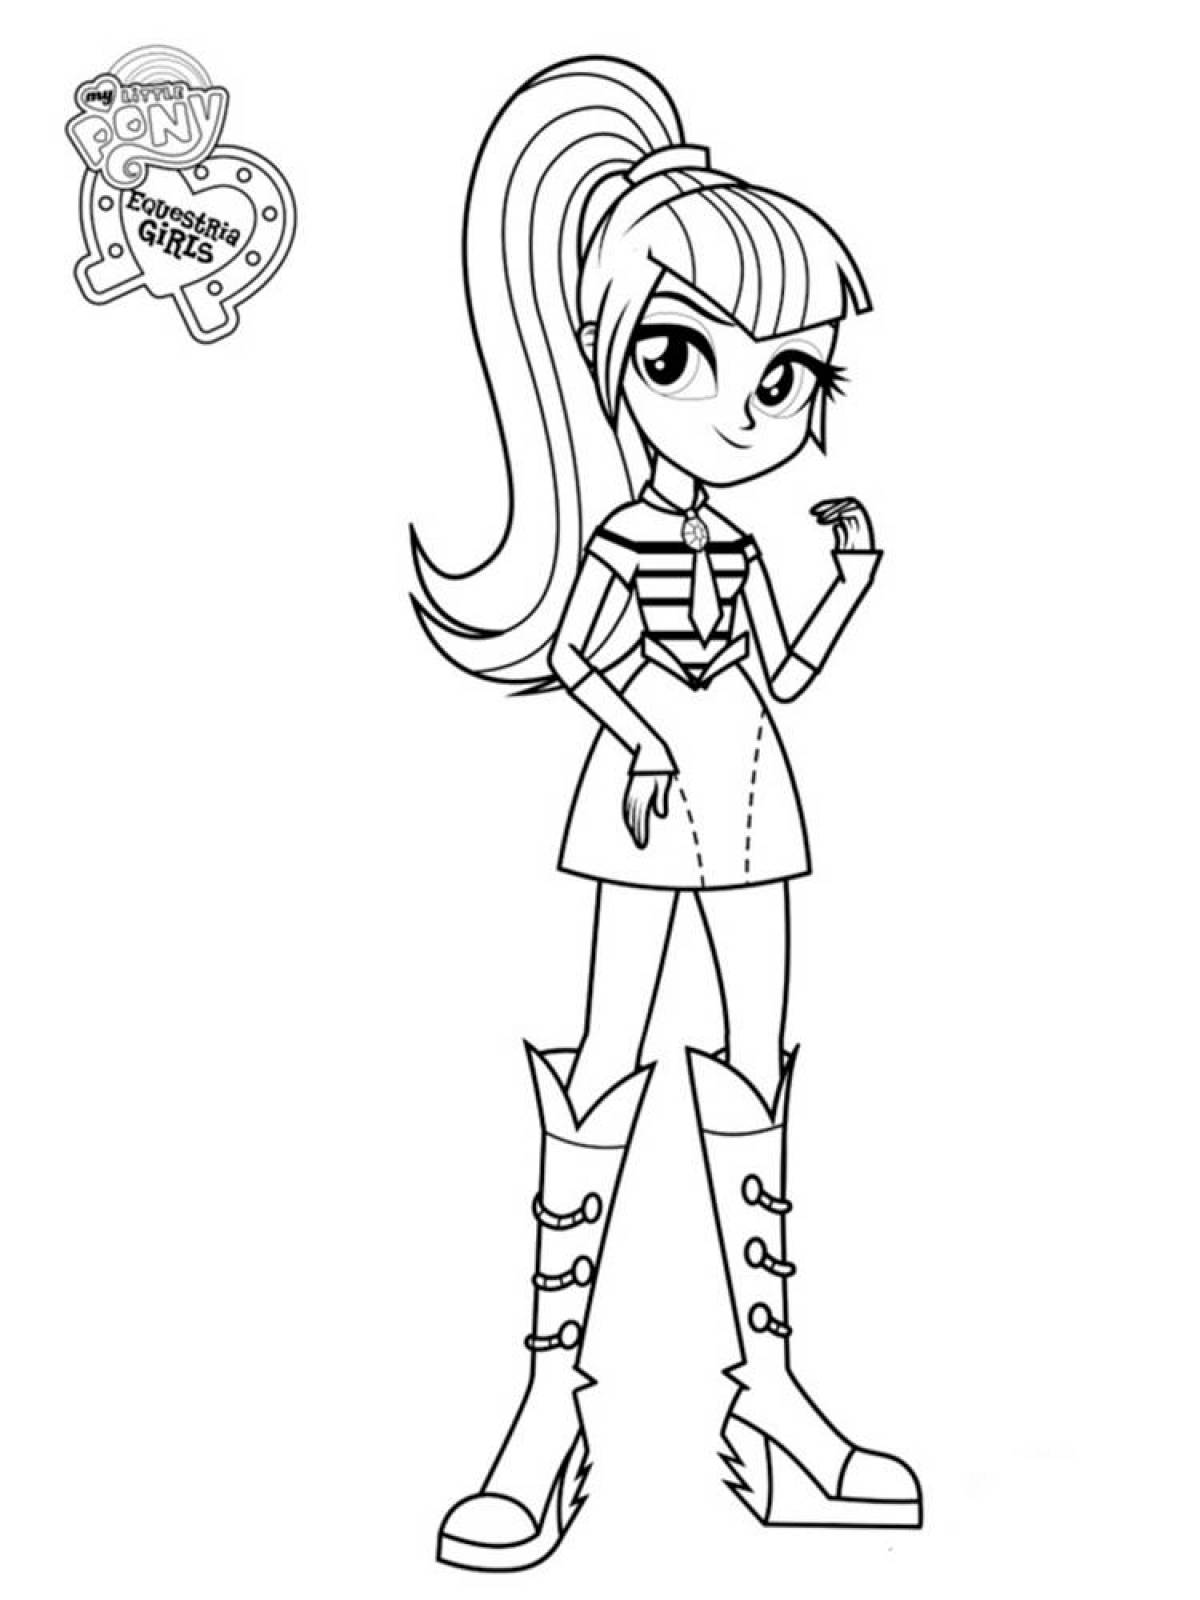 Sparkly equestria girls coloring book